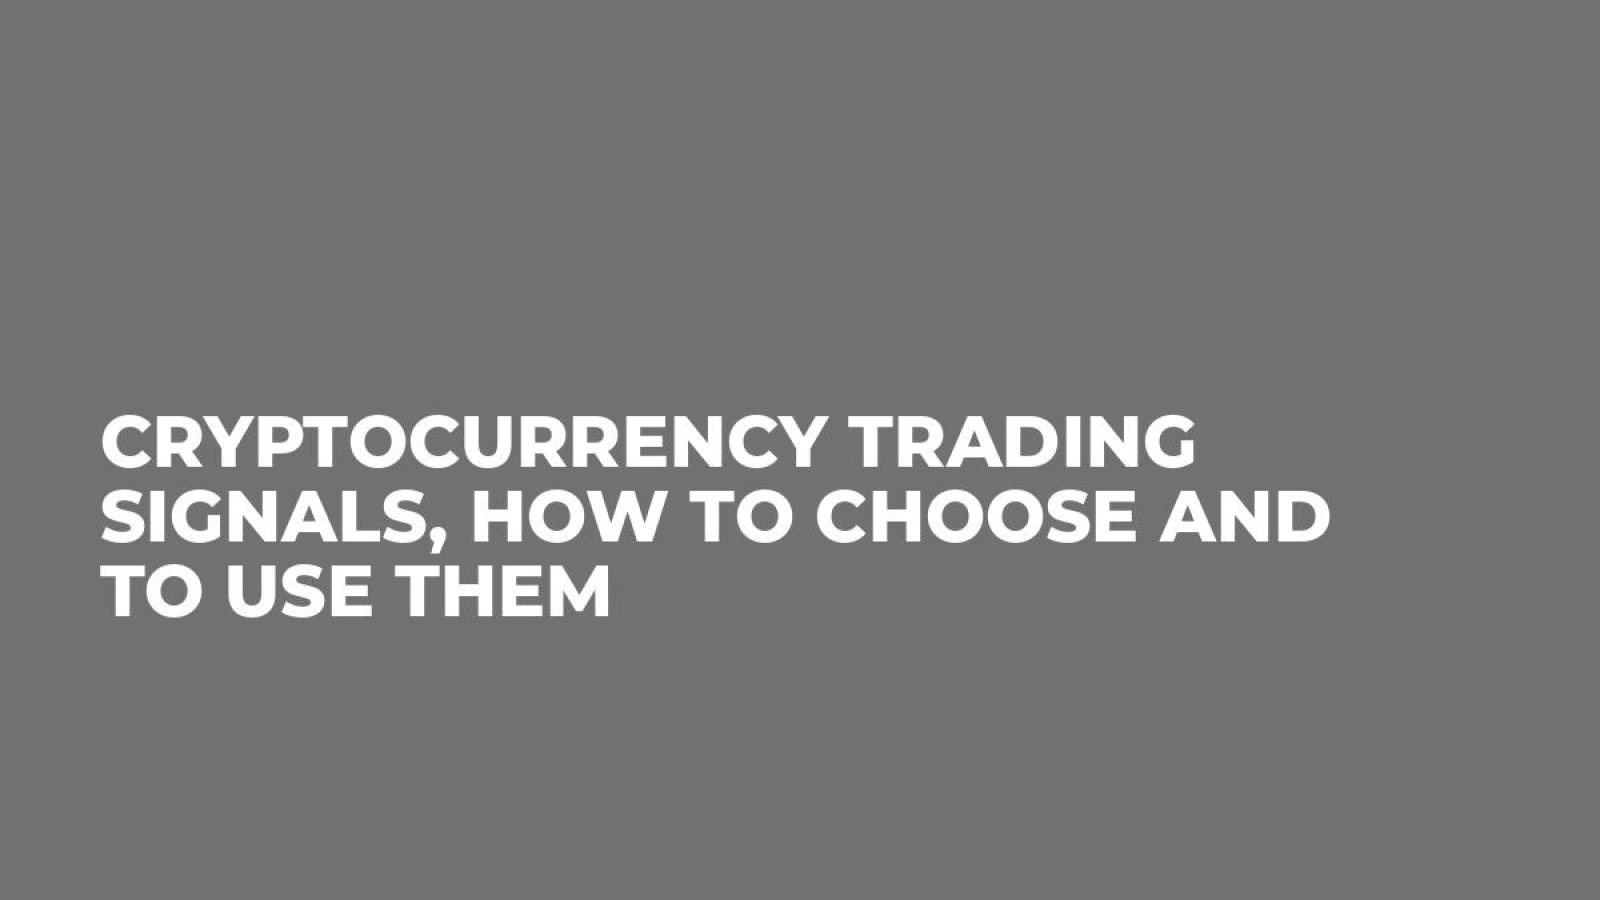 Cryptocurrency Trading Signals, How to Choose and to Use Them